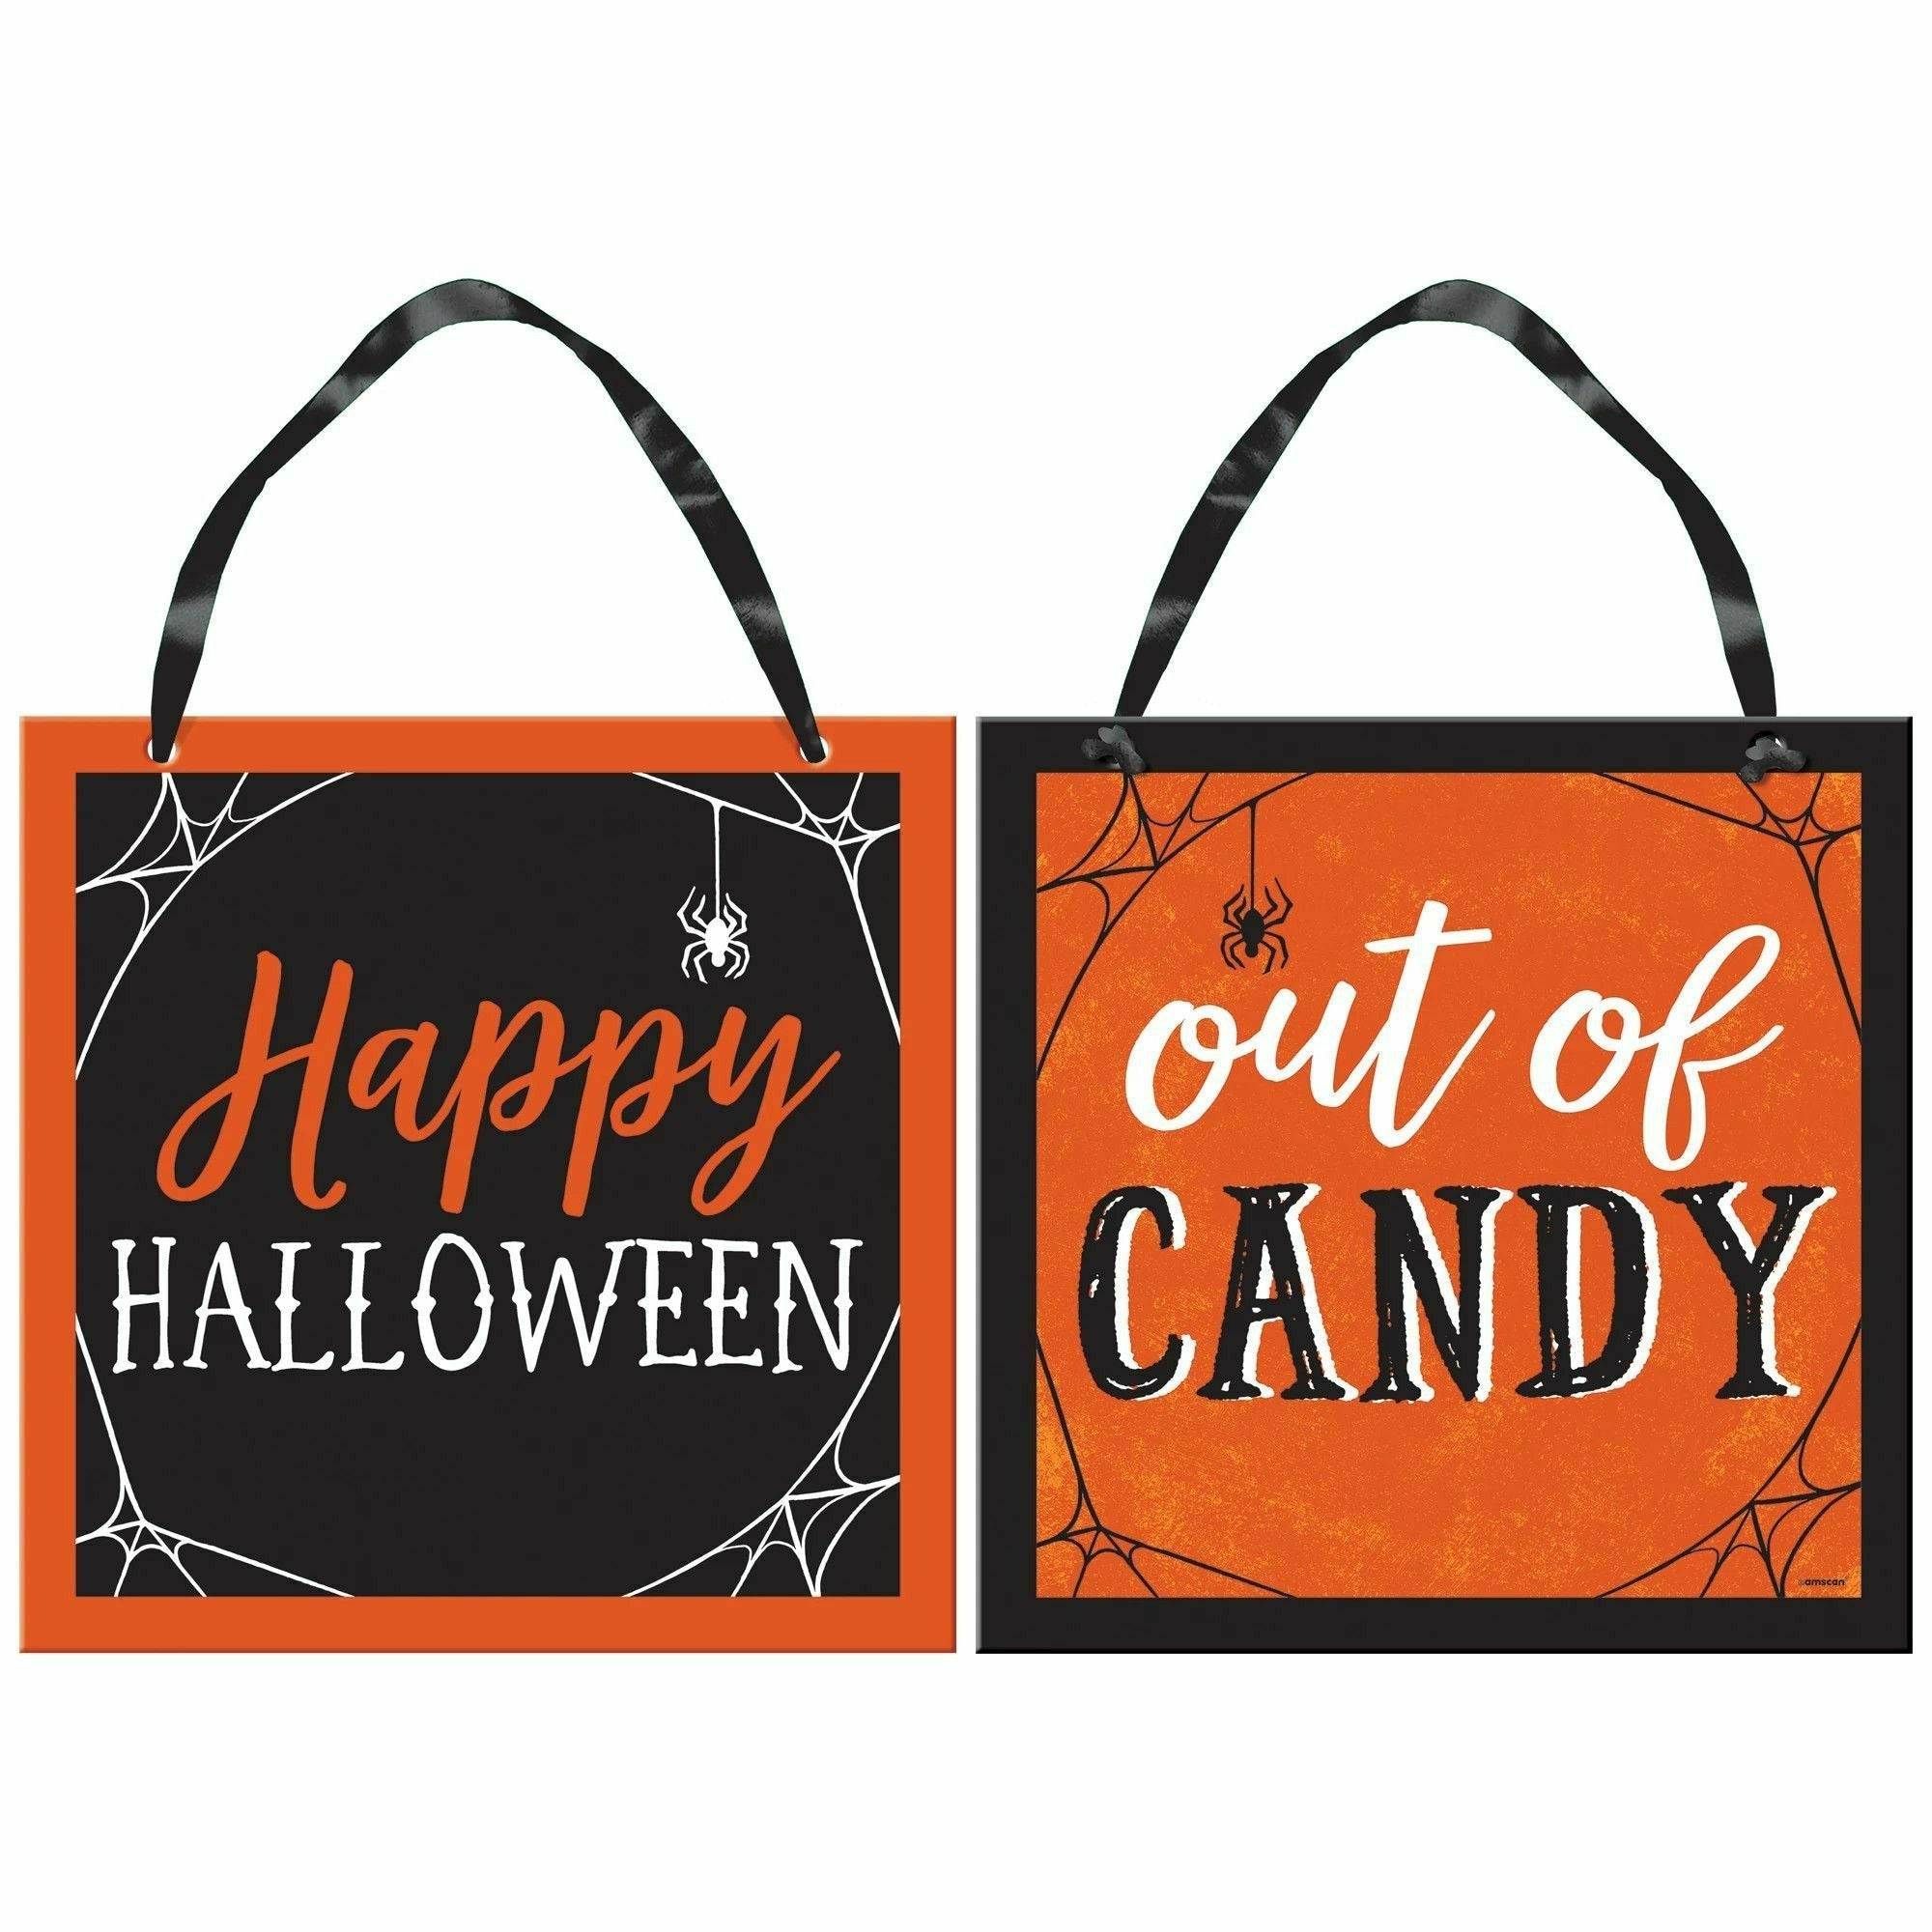 Amscan HOLIDAY: HALLOWEEN Classic Orange & Black Halloween Candy Reversible Sign